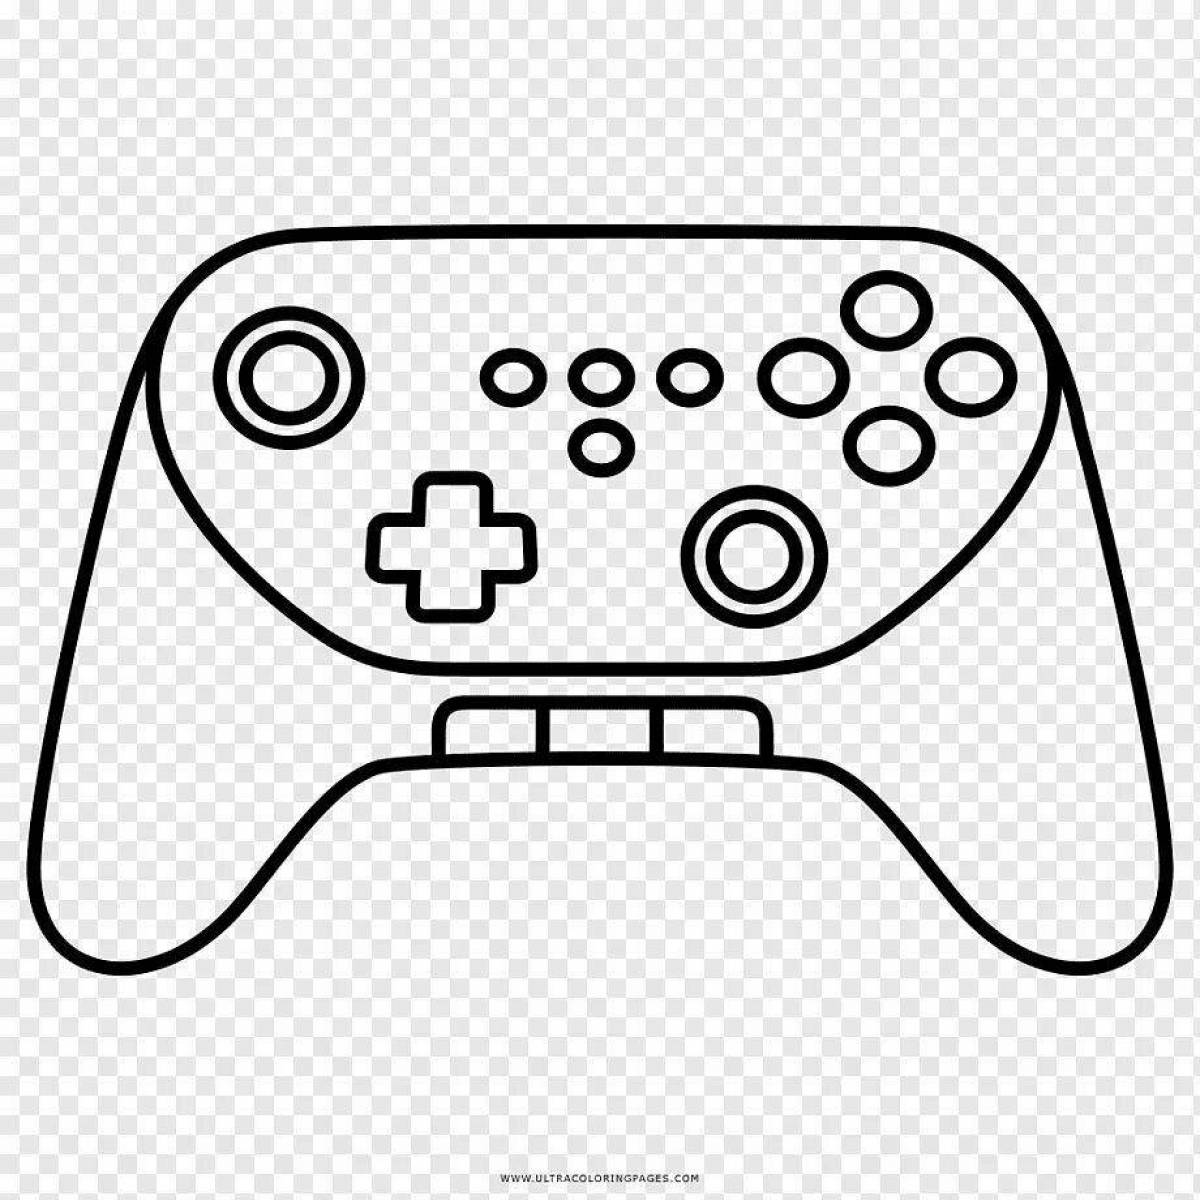 Coloring page of gamepad with shimmering color